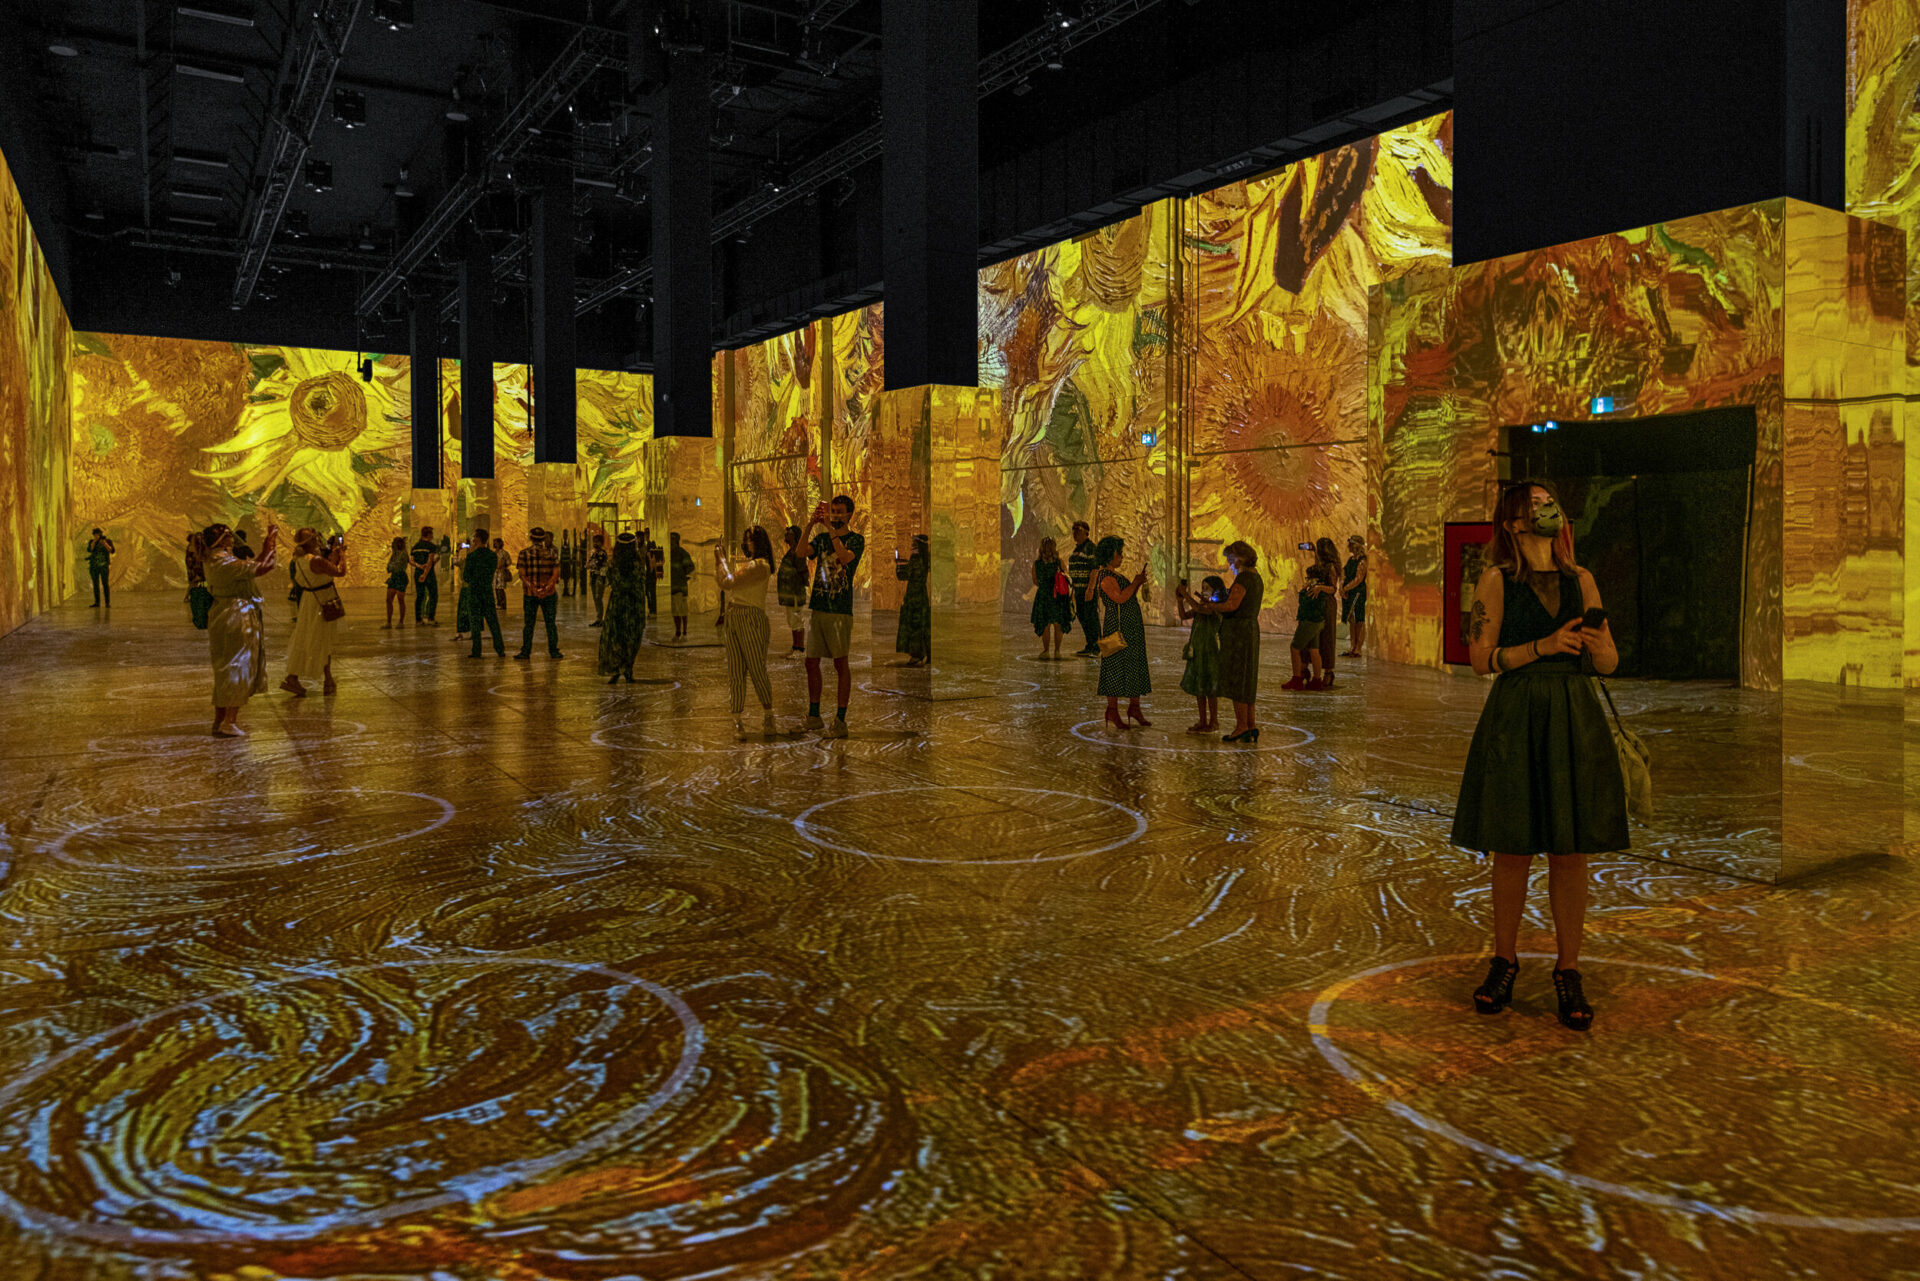 ‘Immersive Van Gogh’ Exhibit Will Let You Step Inside the Art